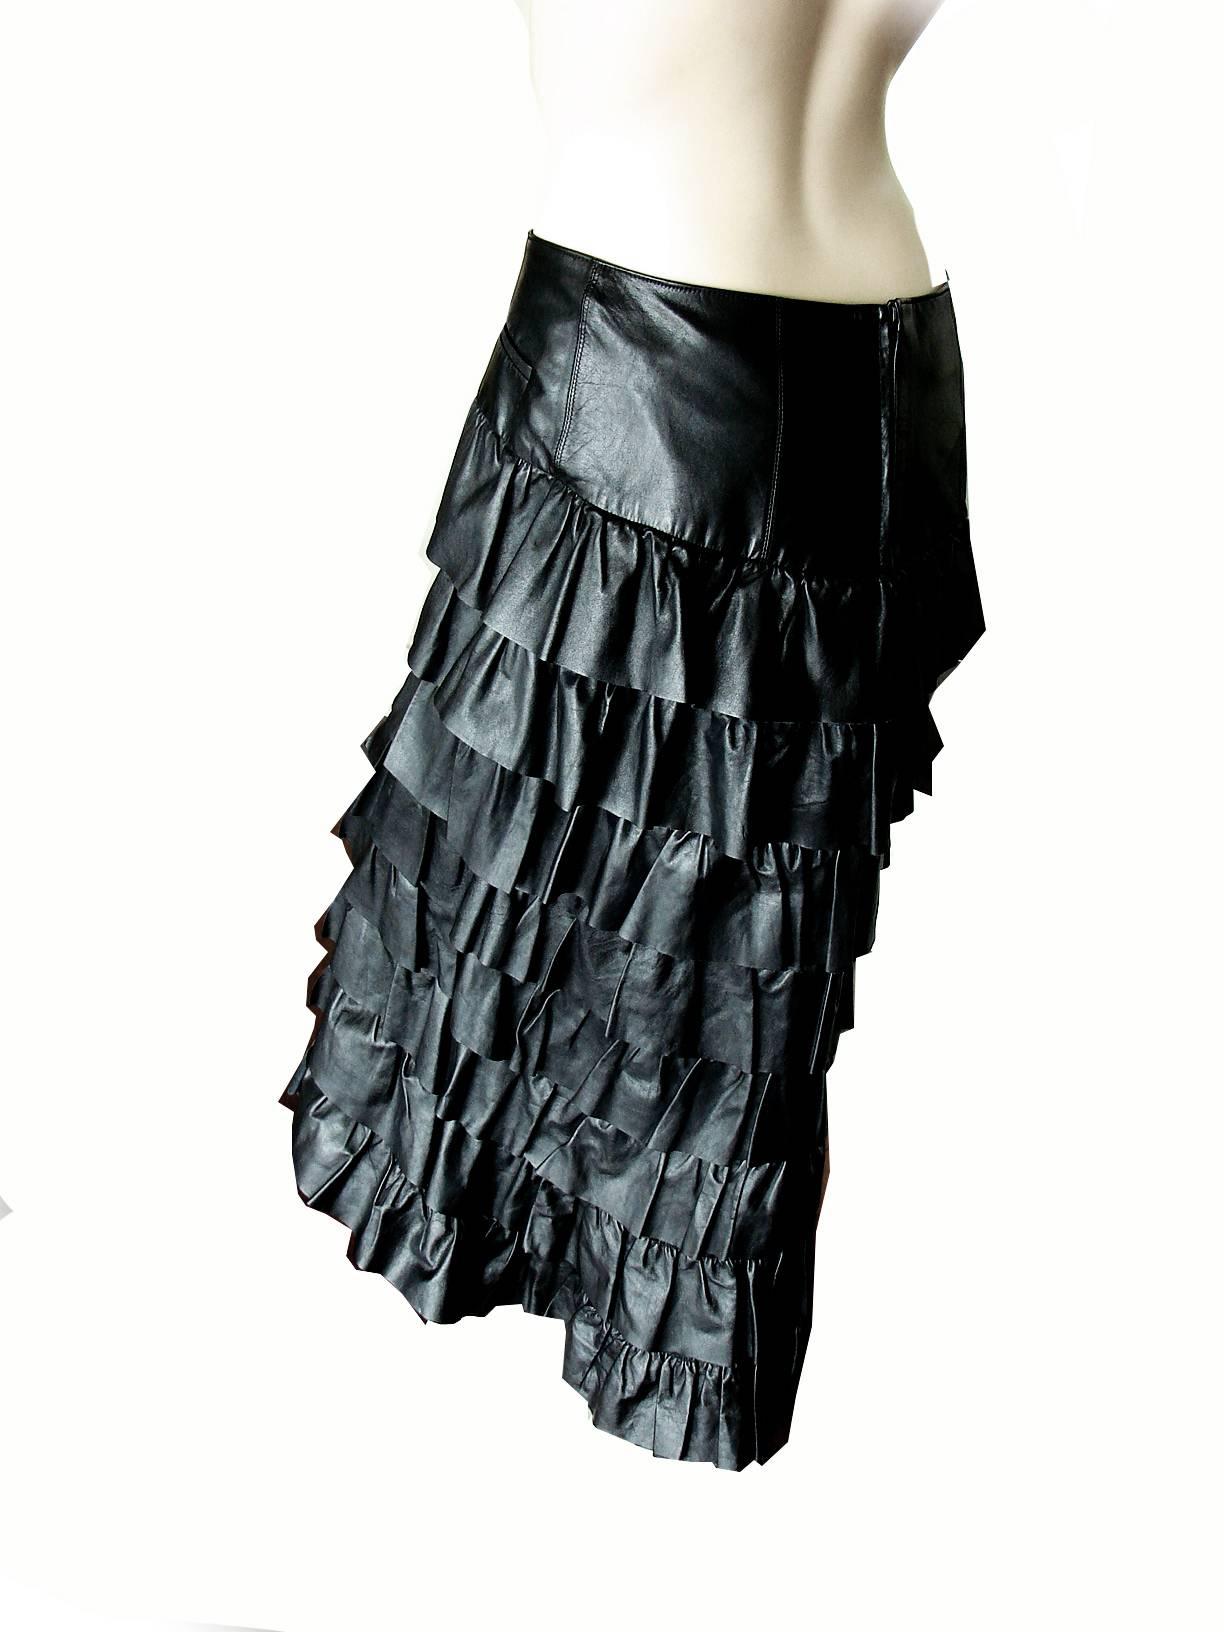 Women's Chanel Black Leather & Sheer Panel Ruffled Maxi Skirt Fall 01A Size 40 